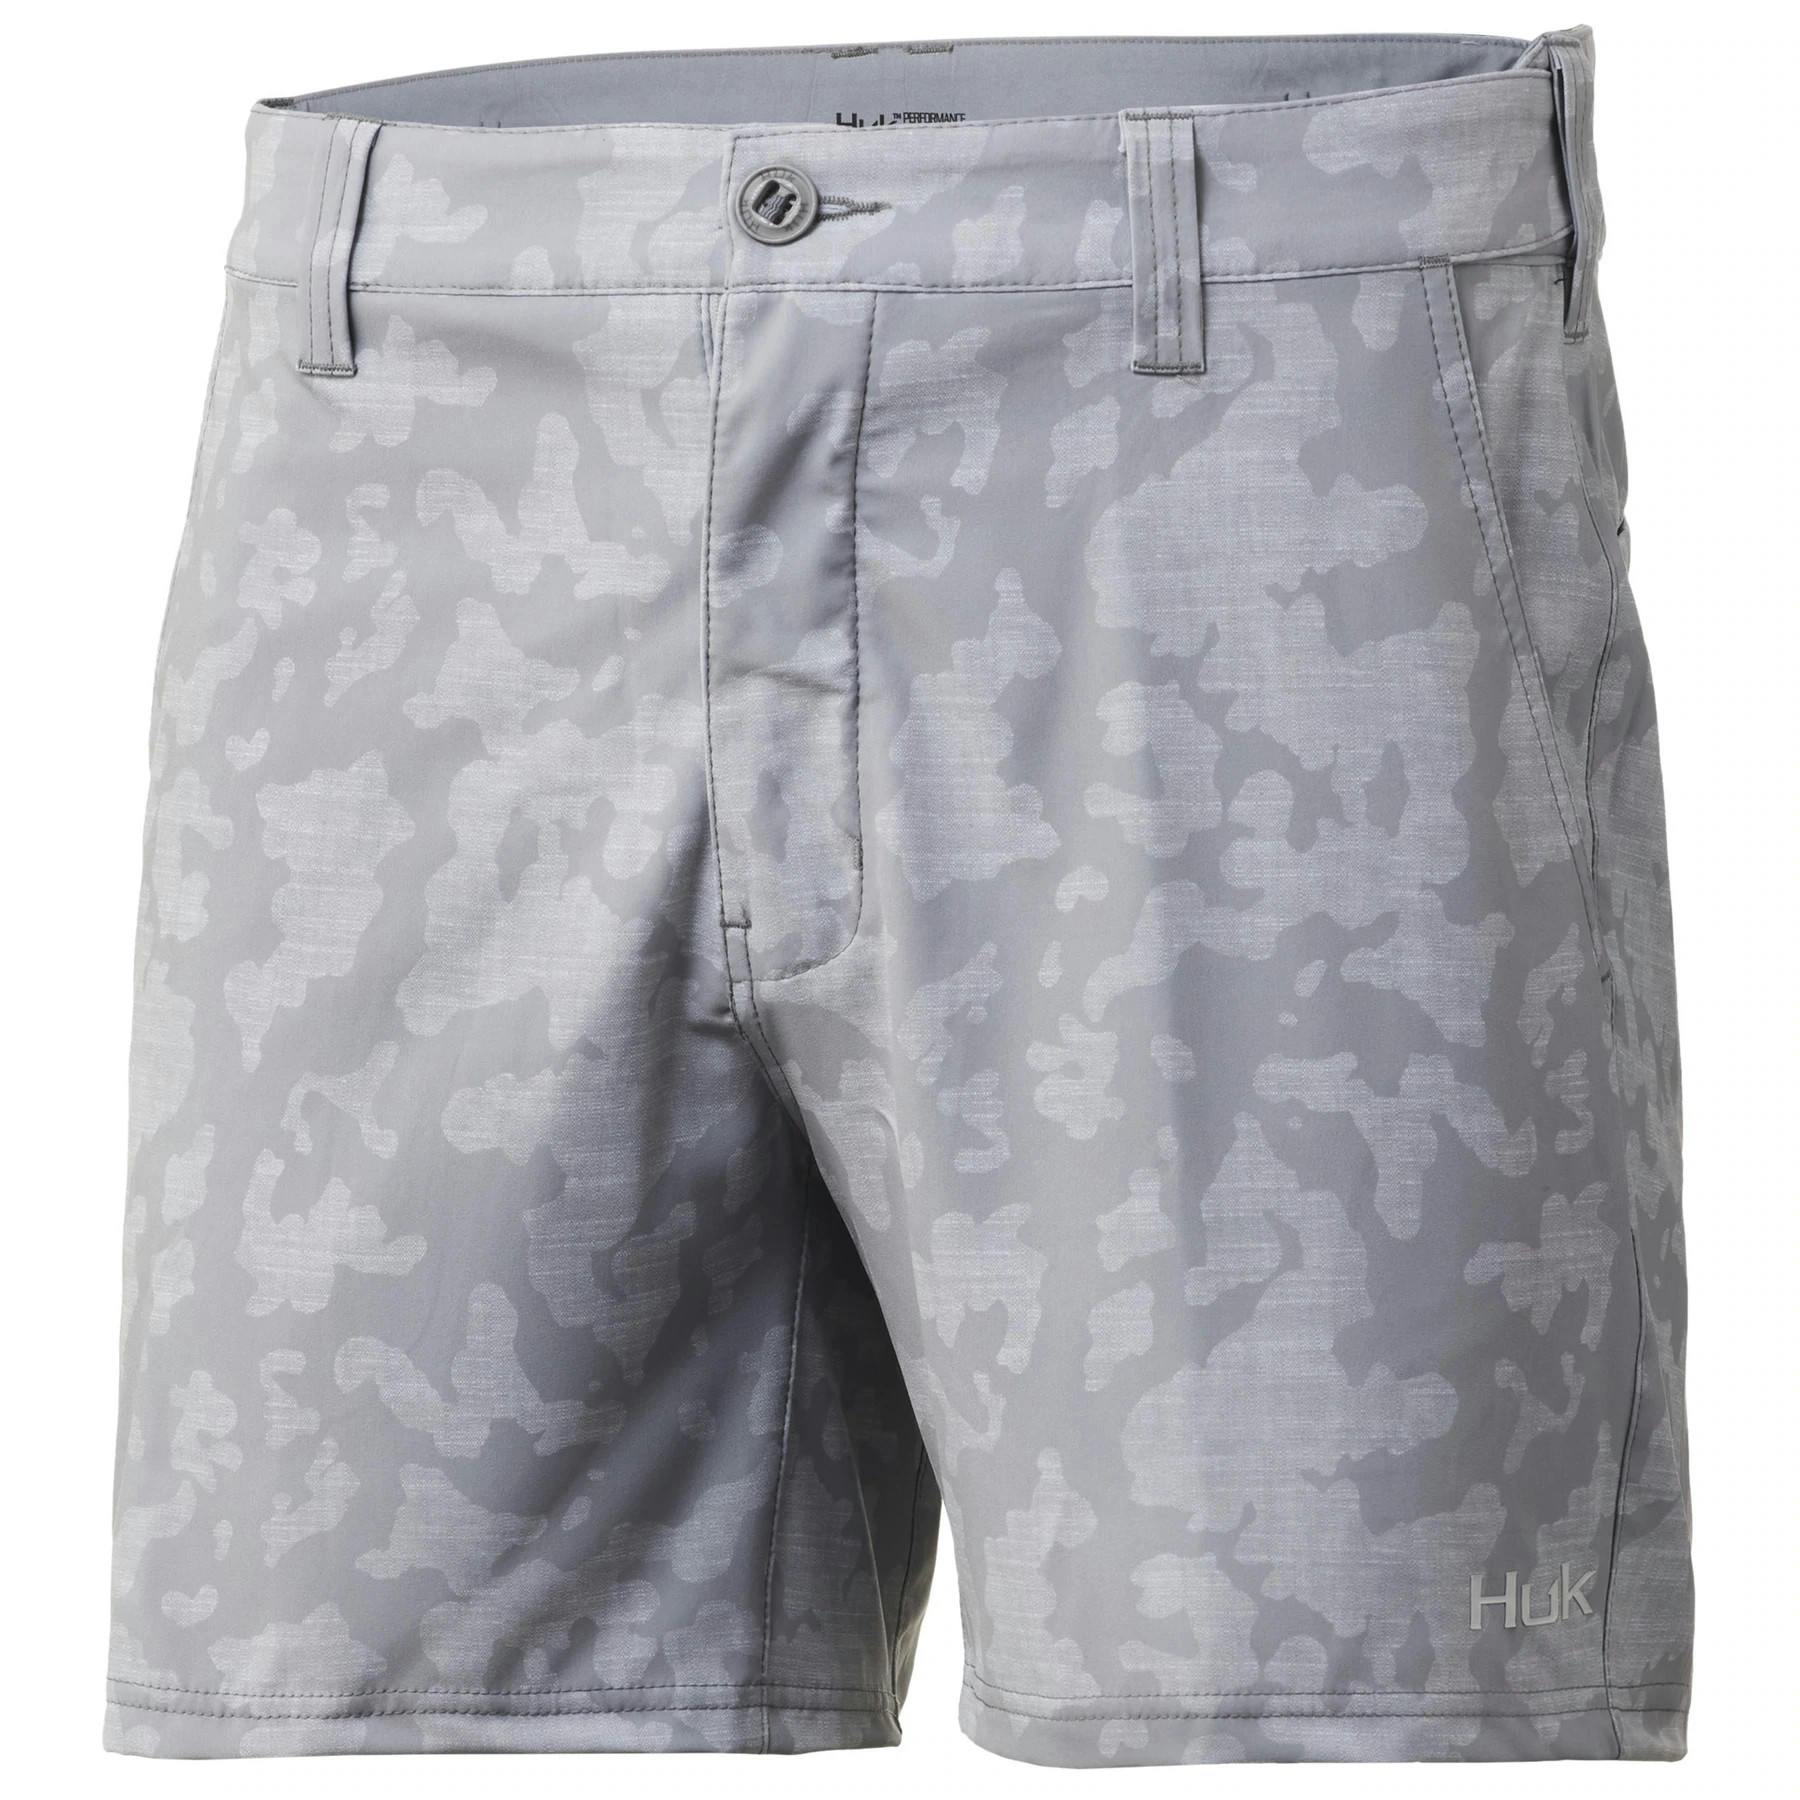 Huk Pursuit Running Lakes Shorts Front - Overcast Gray